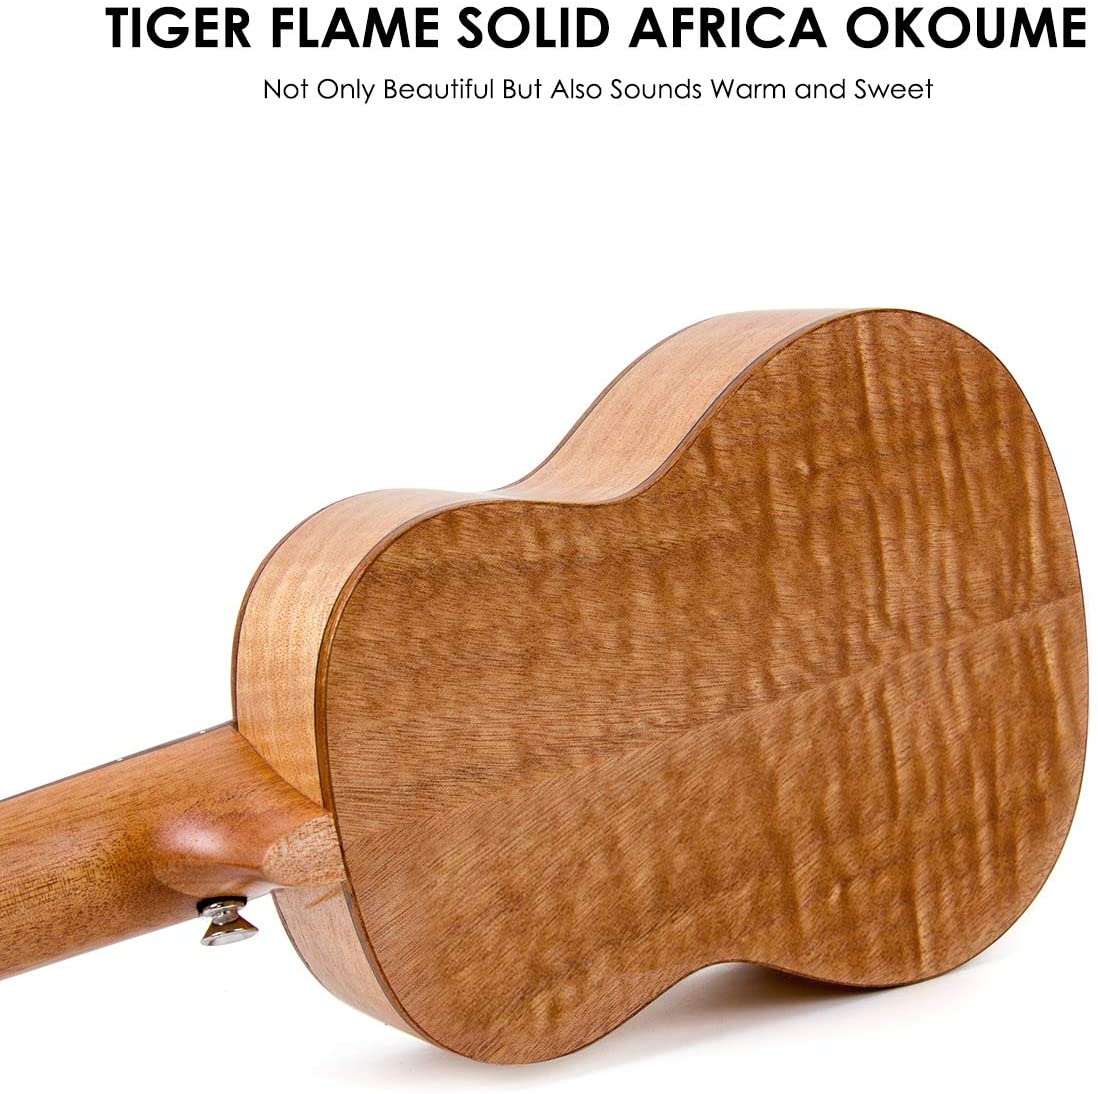 Classical Ukulele Kit Tiger Flame Okoume Wood for Beginner and Professional Player By Kmise - AKLOT